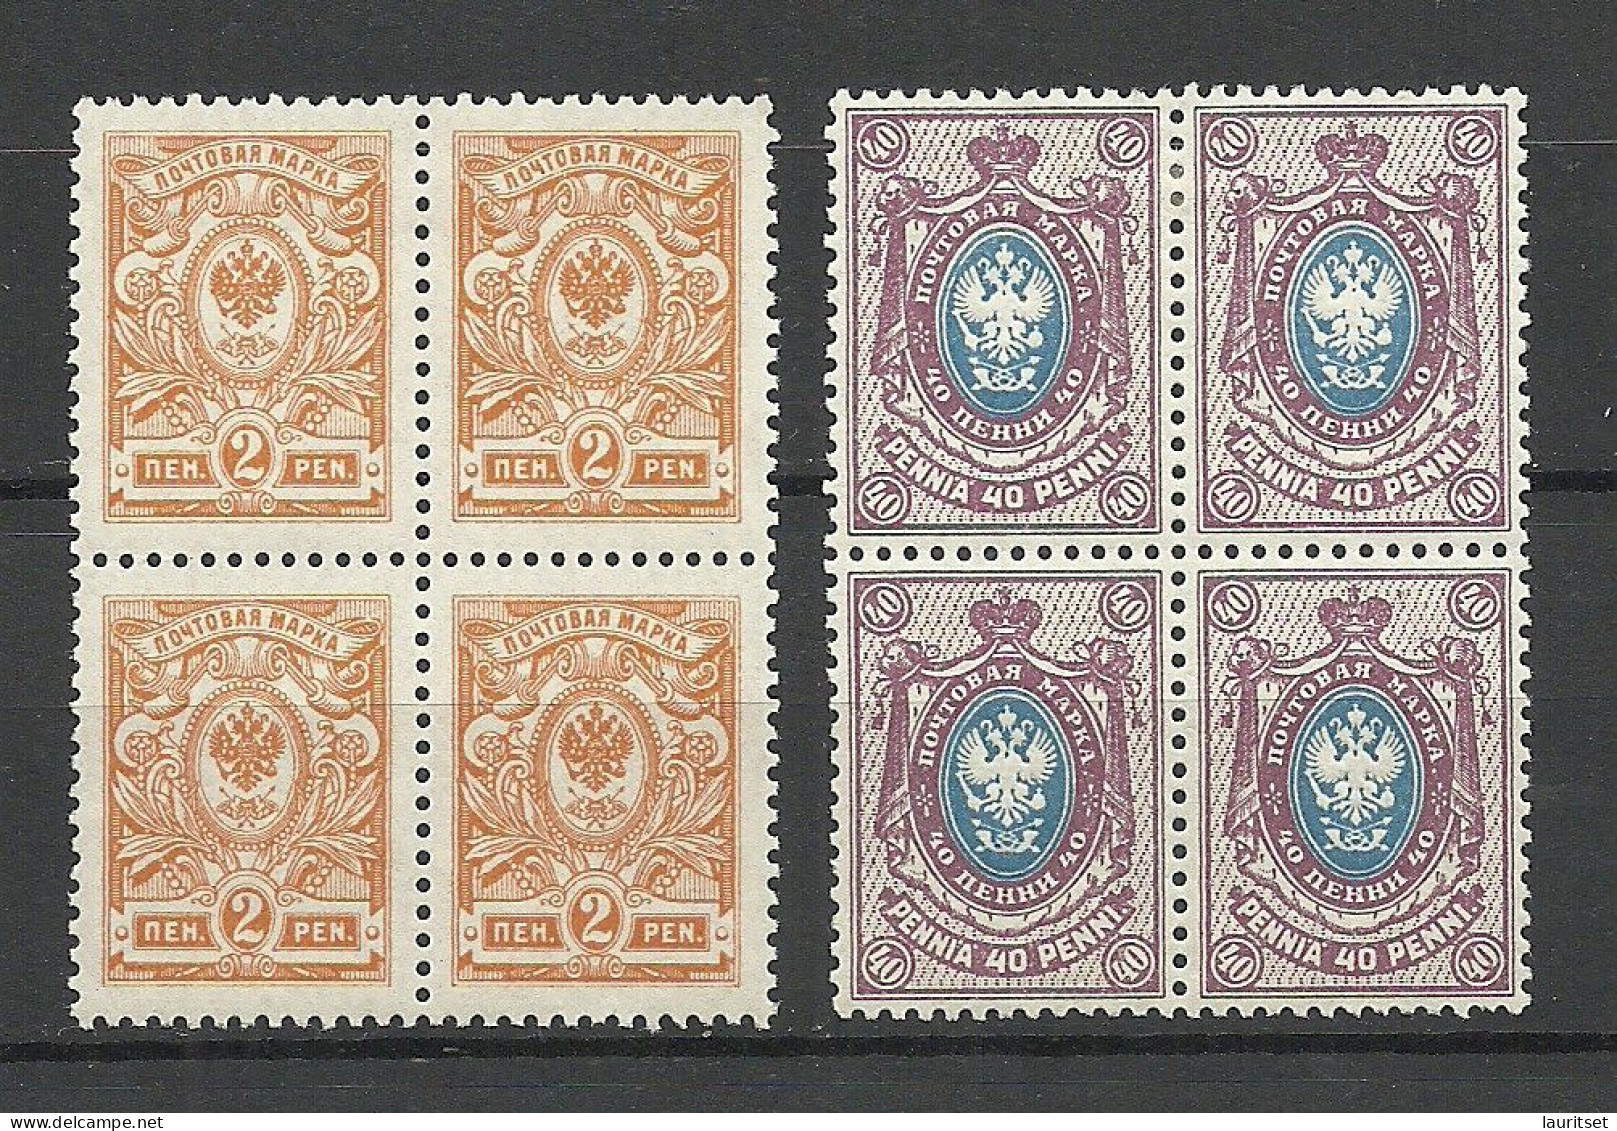 FINLAND FINNLAND 1911 Michel 61 & 65 As 4-blocks MNH/MH (2 Upper Stamps Are MNH/**, Lower Row Is MH/*) - Ongebruikt